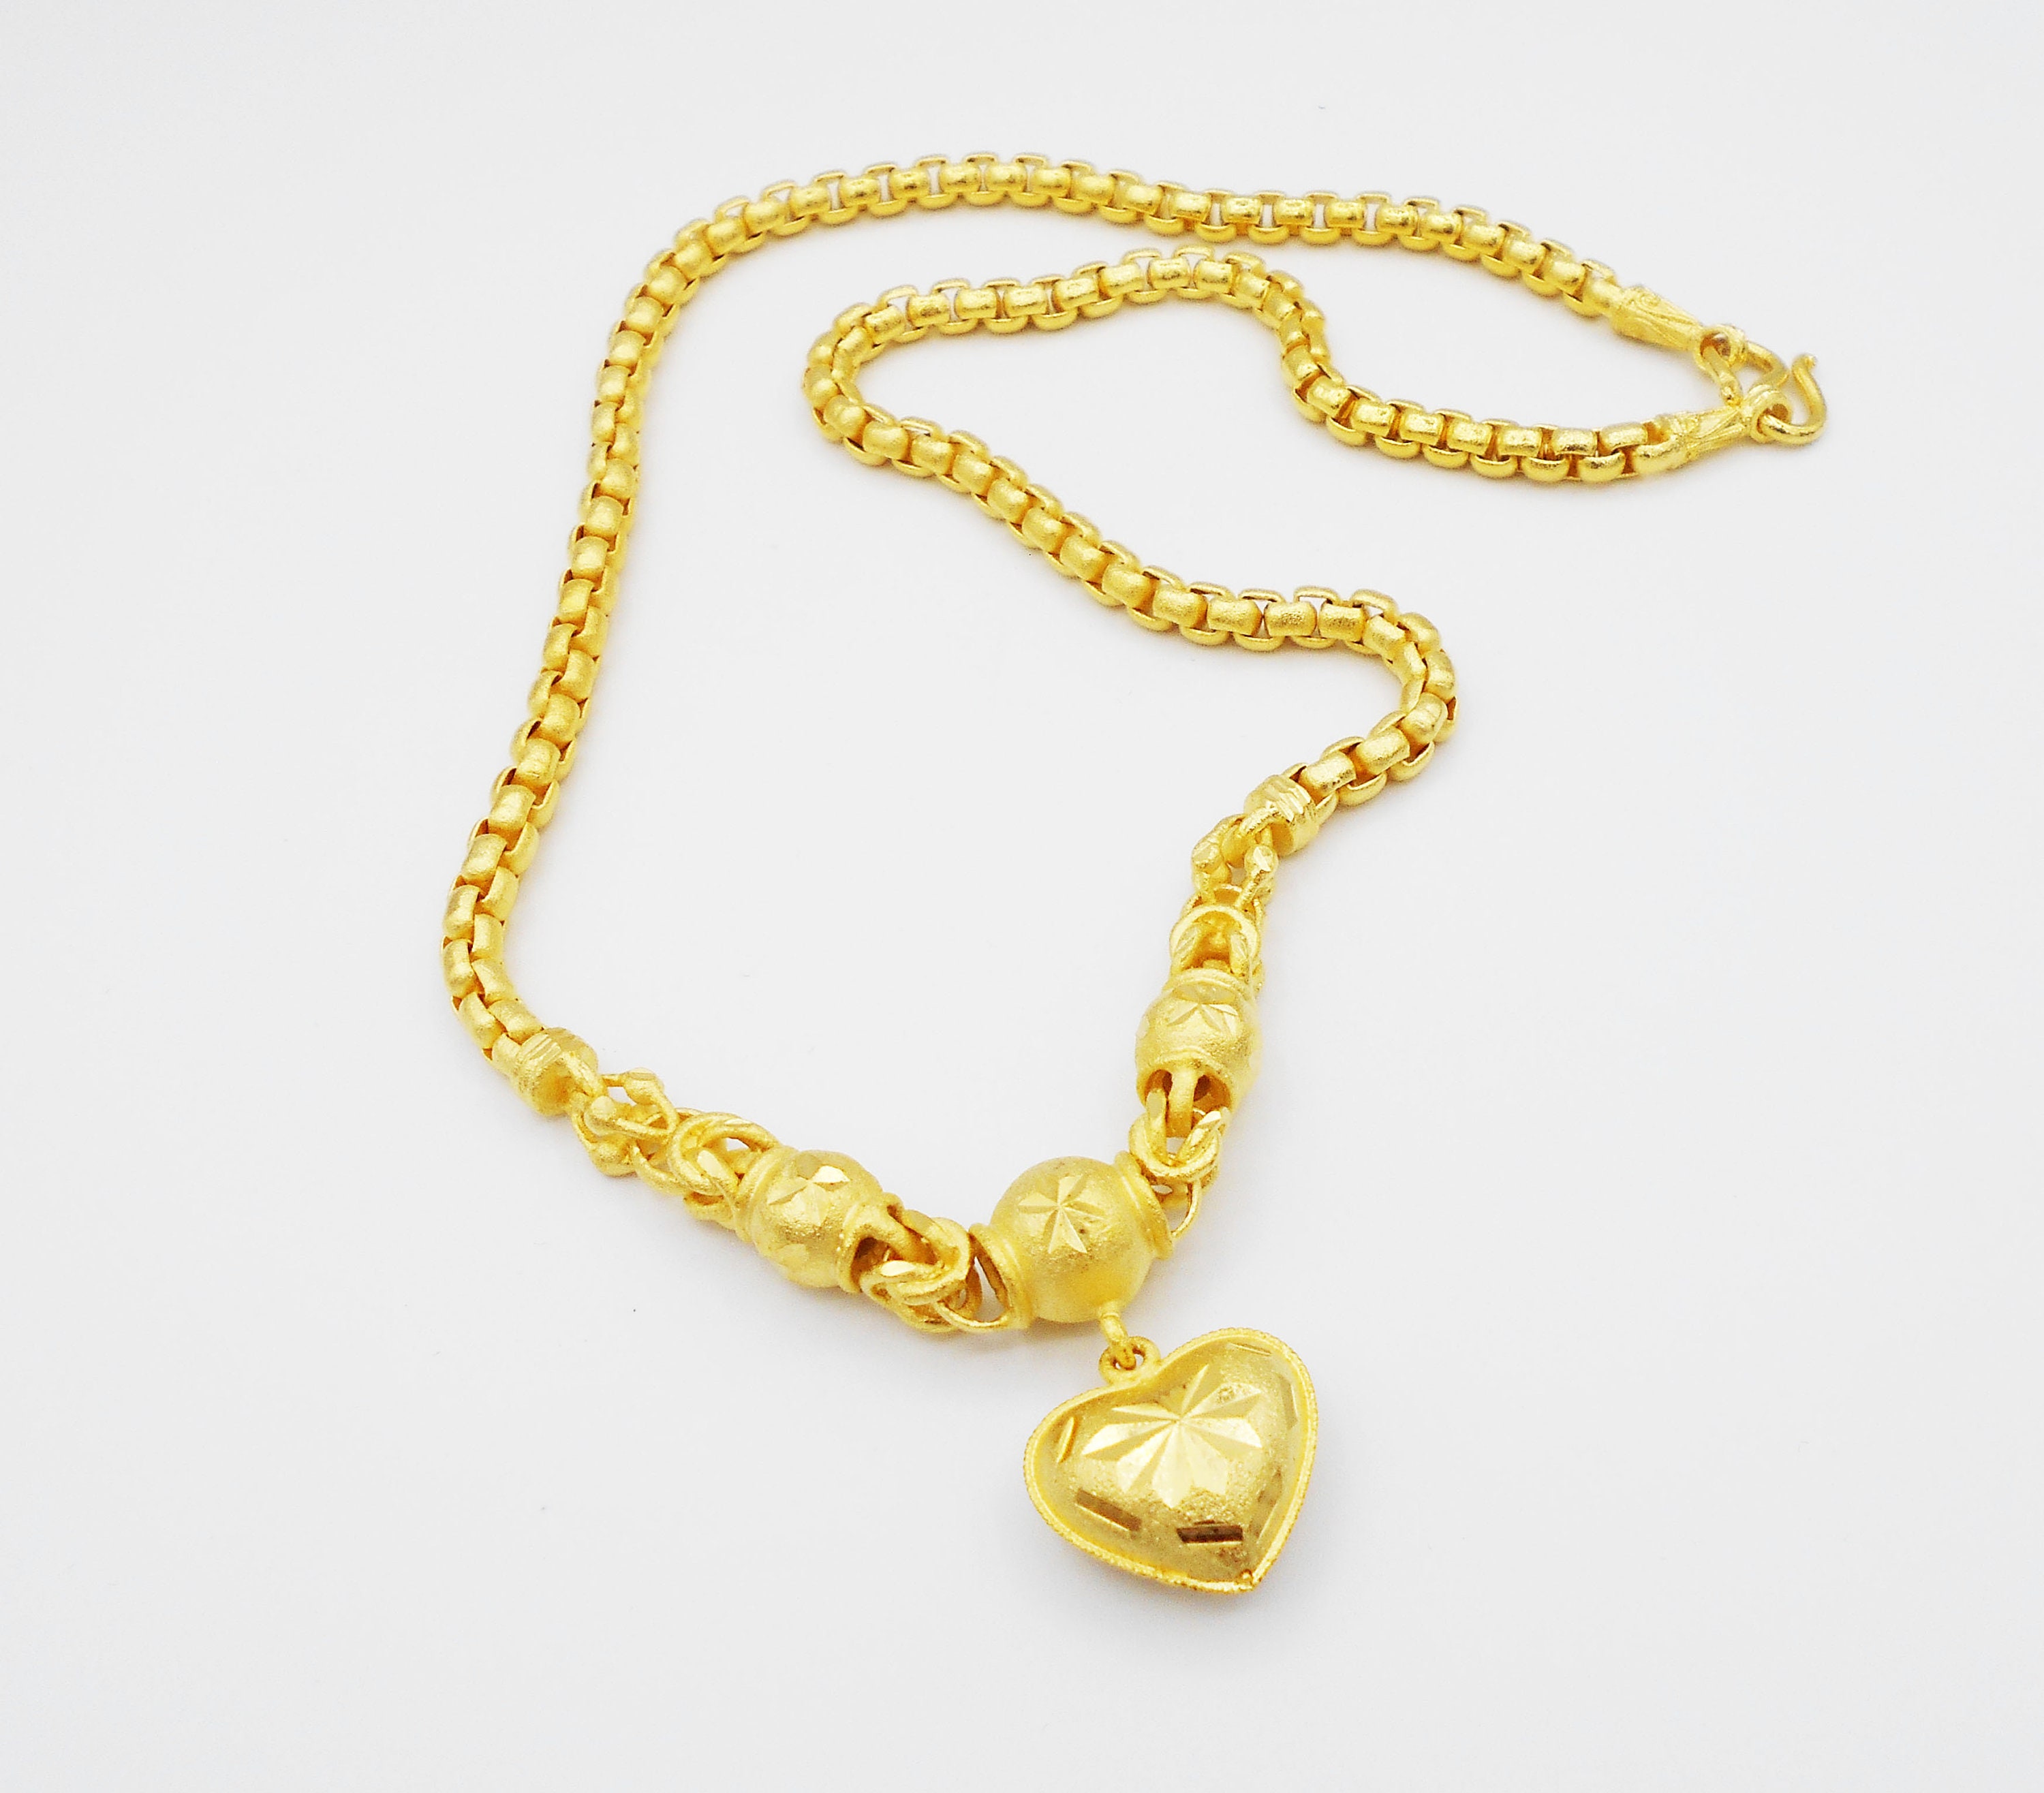 Thai Baht Gold 24k handmade 99.9% gold chains.Direct from Thailand. The  Investment you Wear